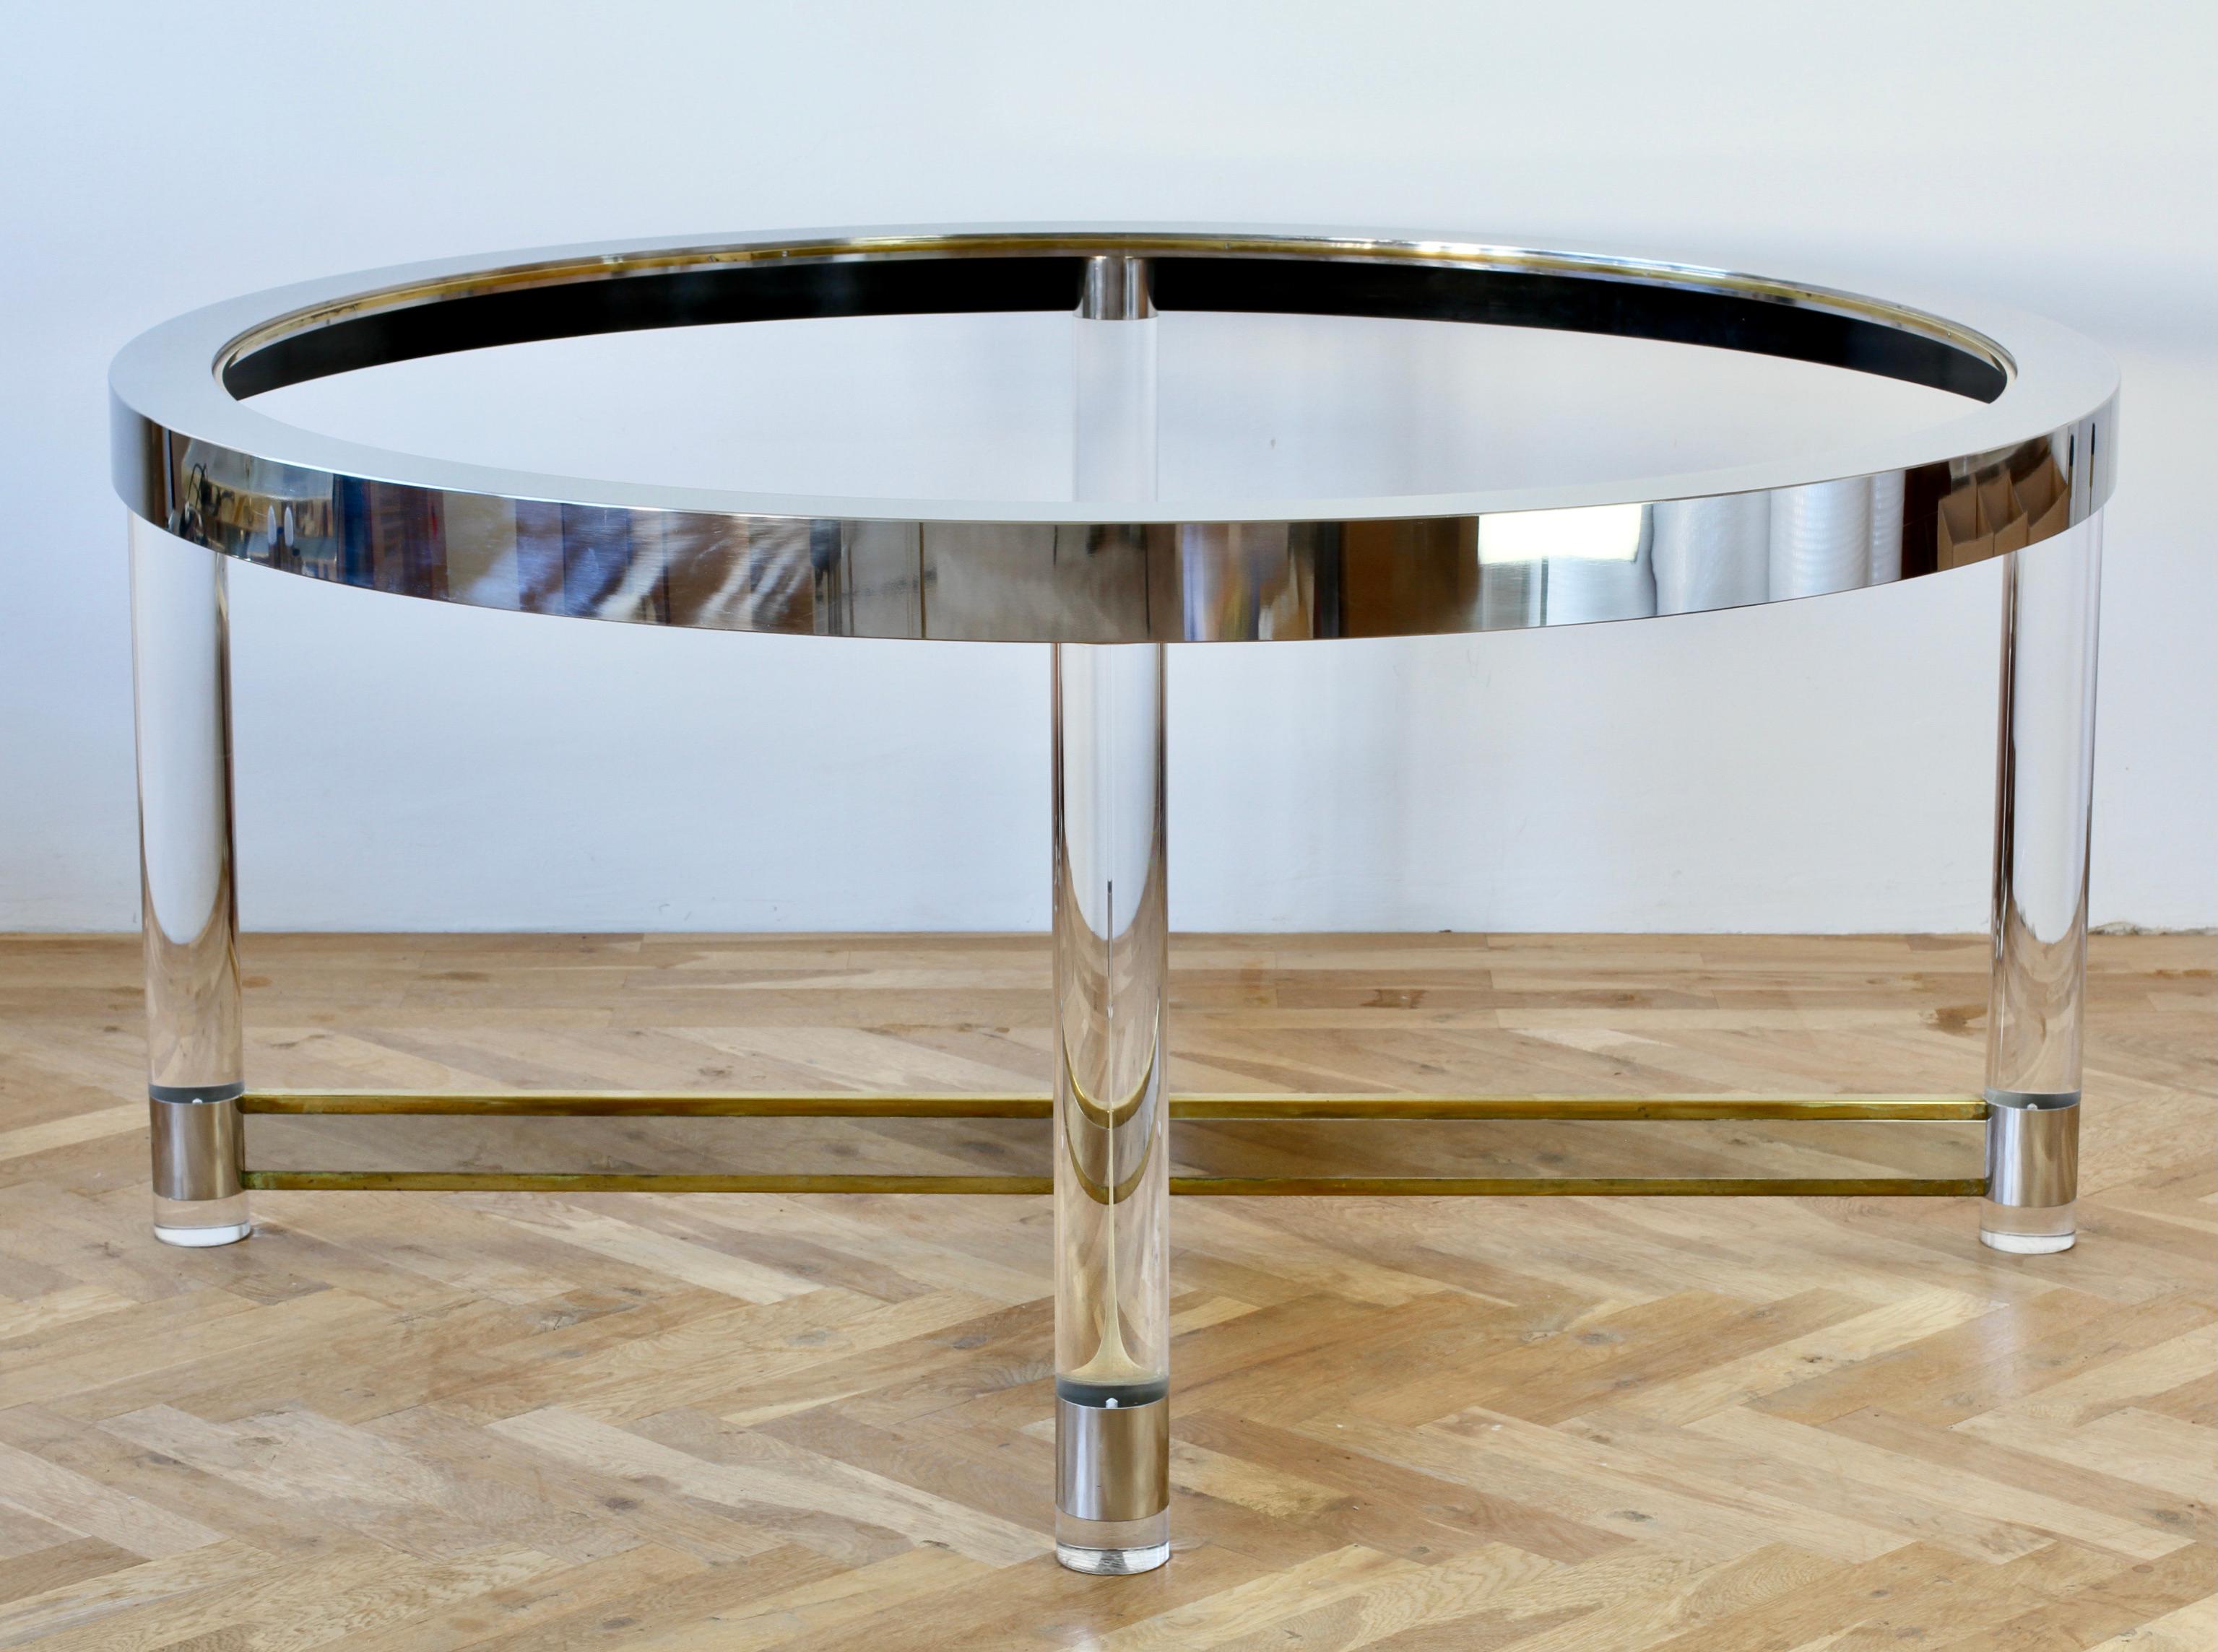 Huge Maison Jansen Style Mid-Century Brass, Chrome & Lucite Dining Table 1970s For Sale 9